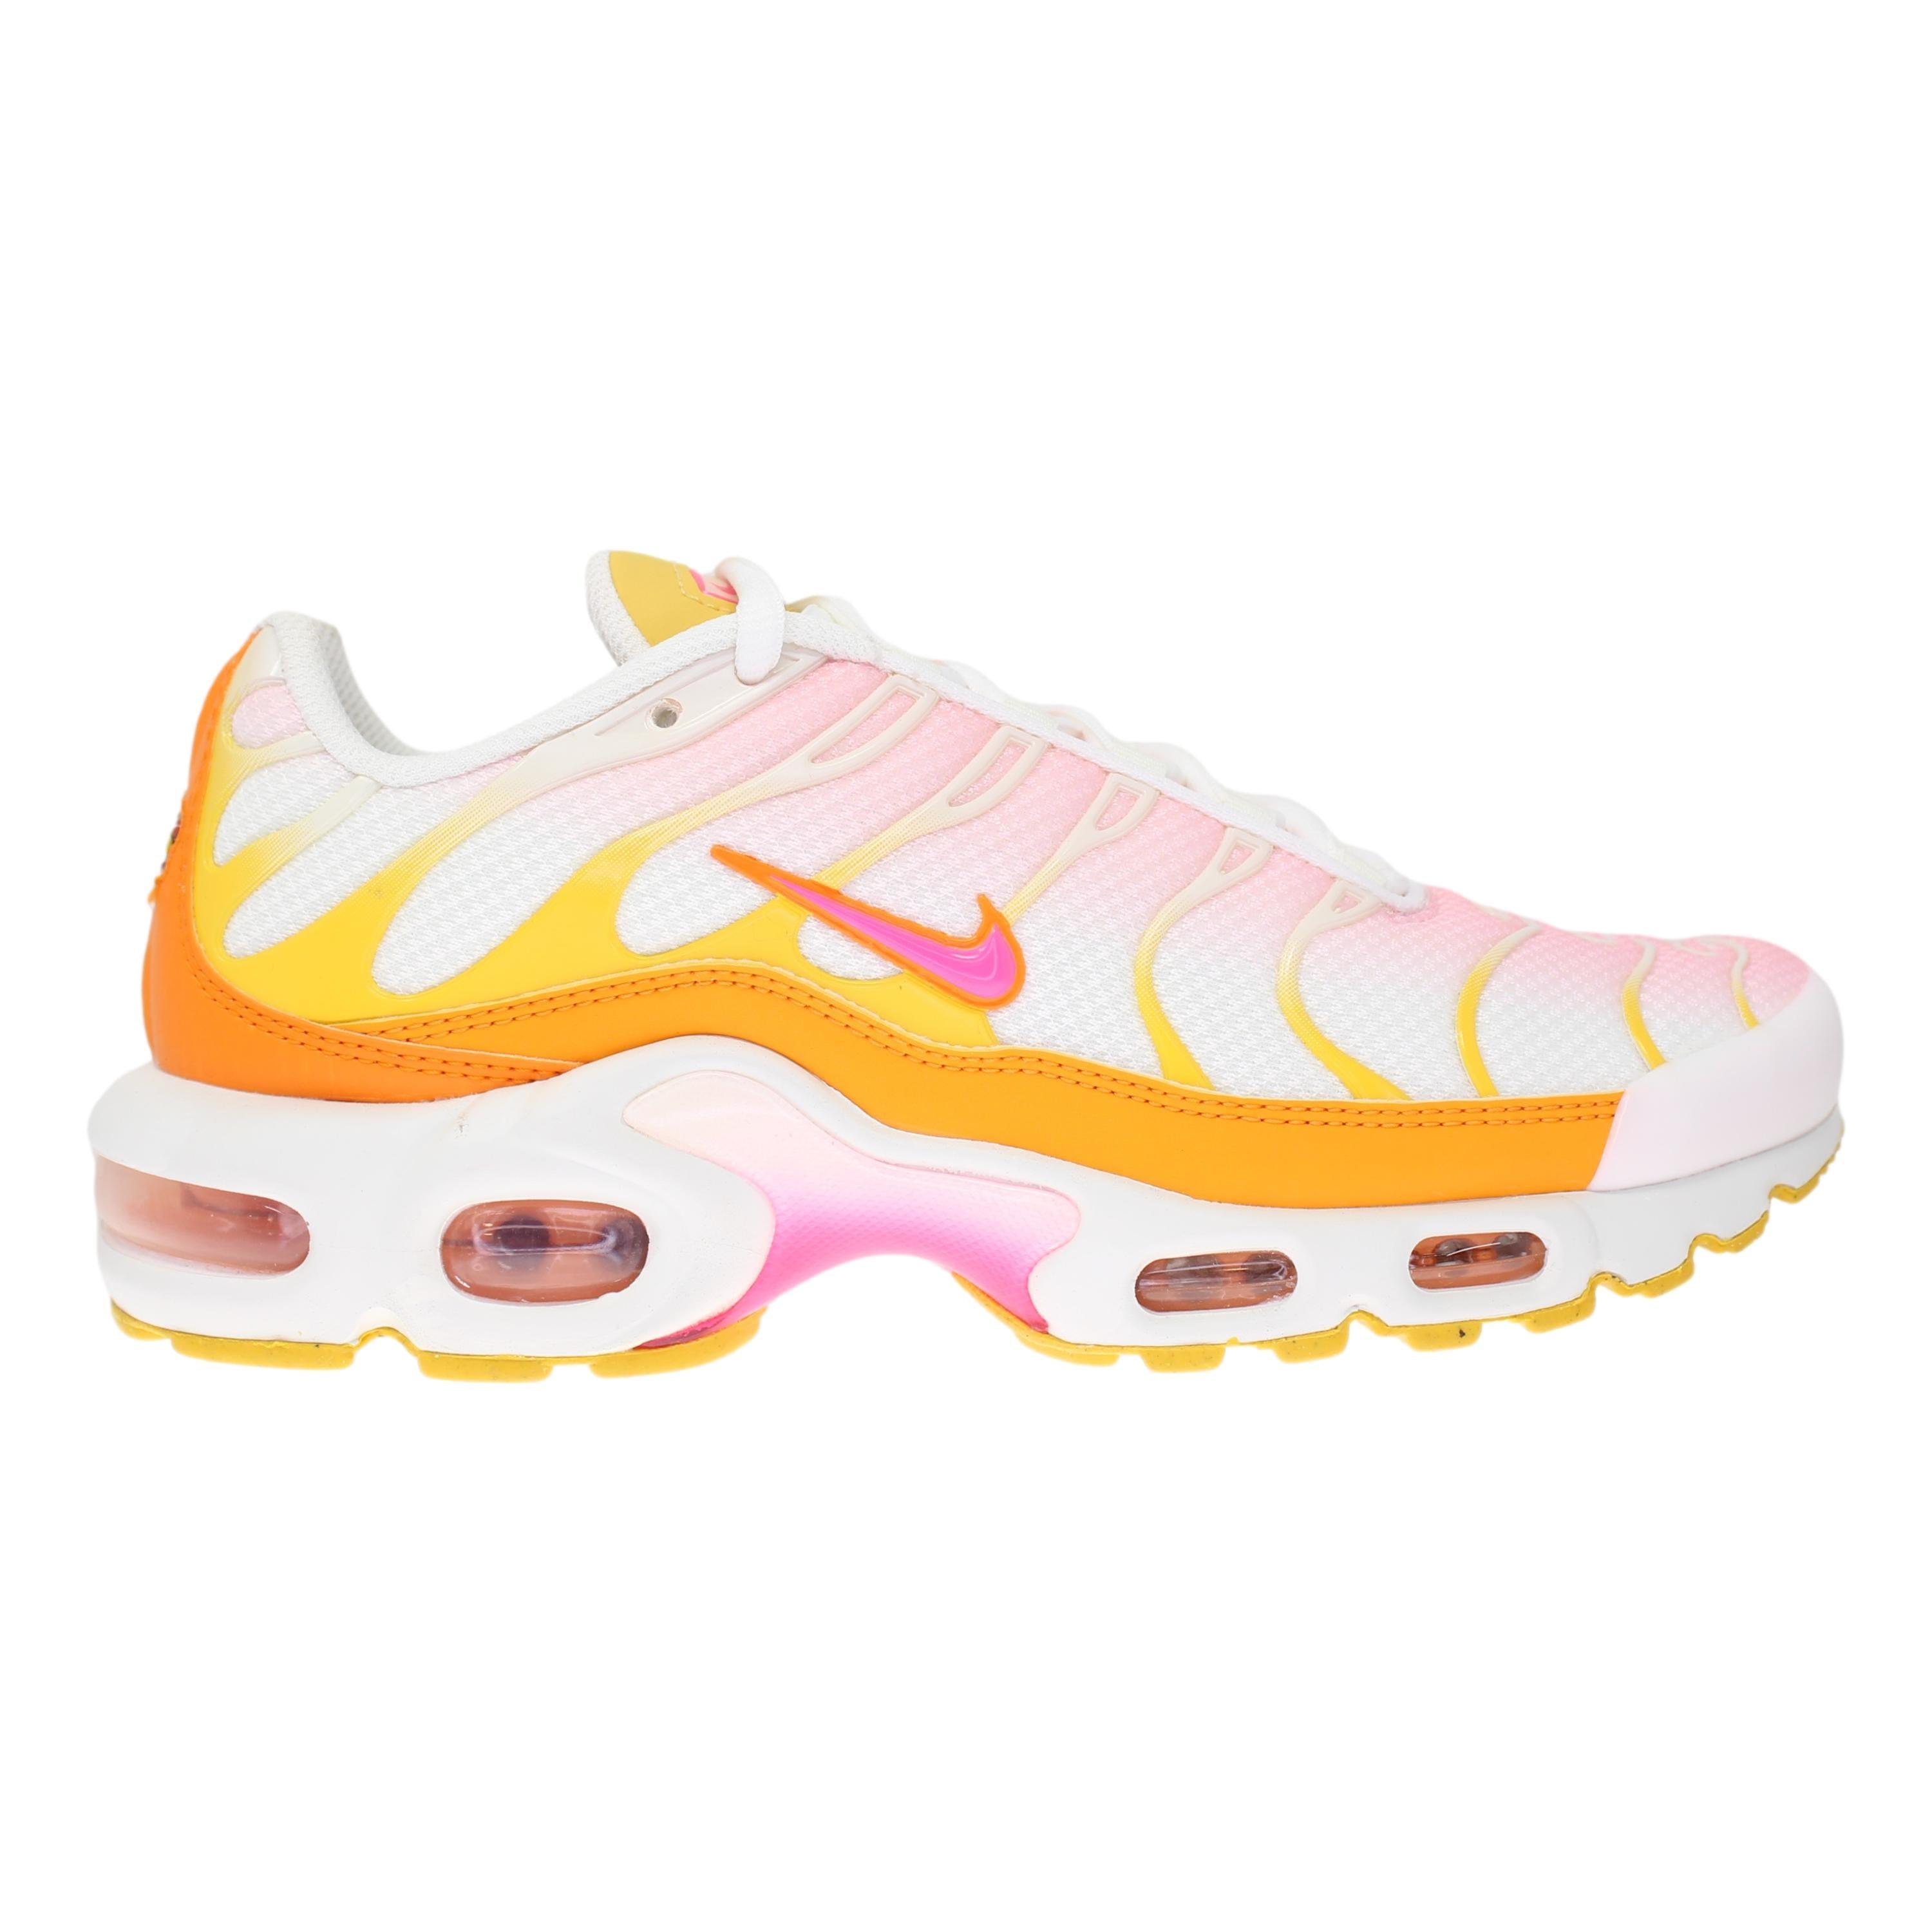 Nike Air Max Plus Sail/hyper Pink-solar Flare Dx2673-100 in Yellow | Lyst